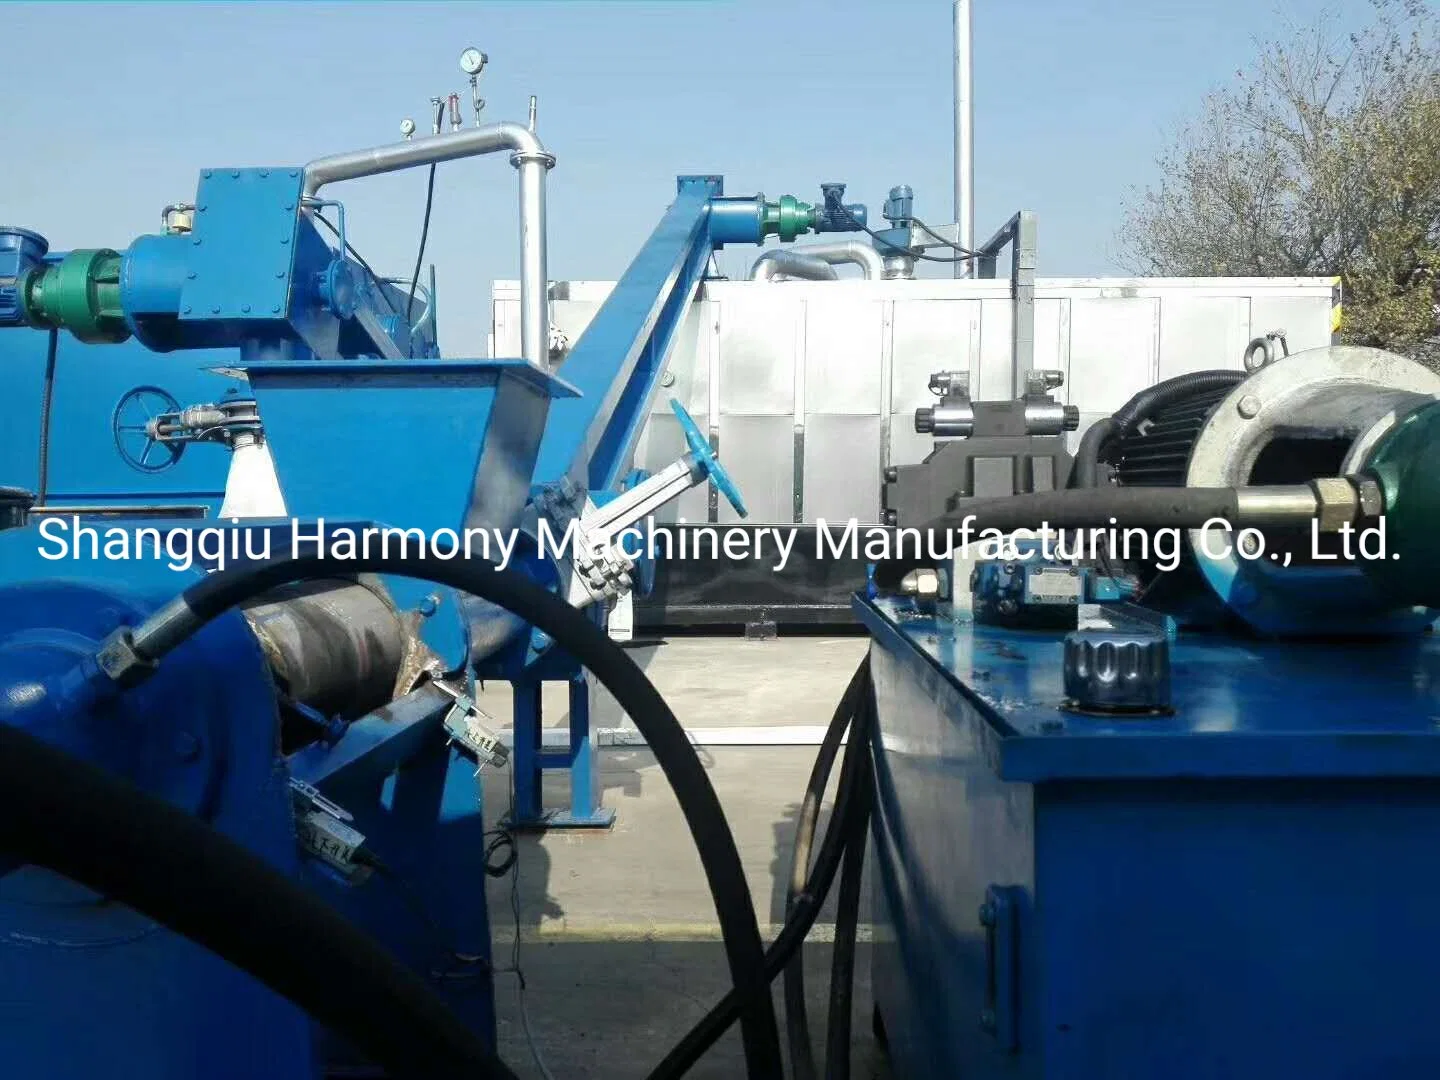 5-10 Ton Skid Type Mobile Fully Continuous Pyrolysis Plant Used for Plastic/Rubber/Sludge Recycling to Oil Energy